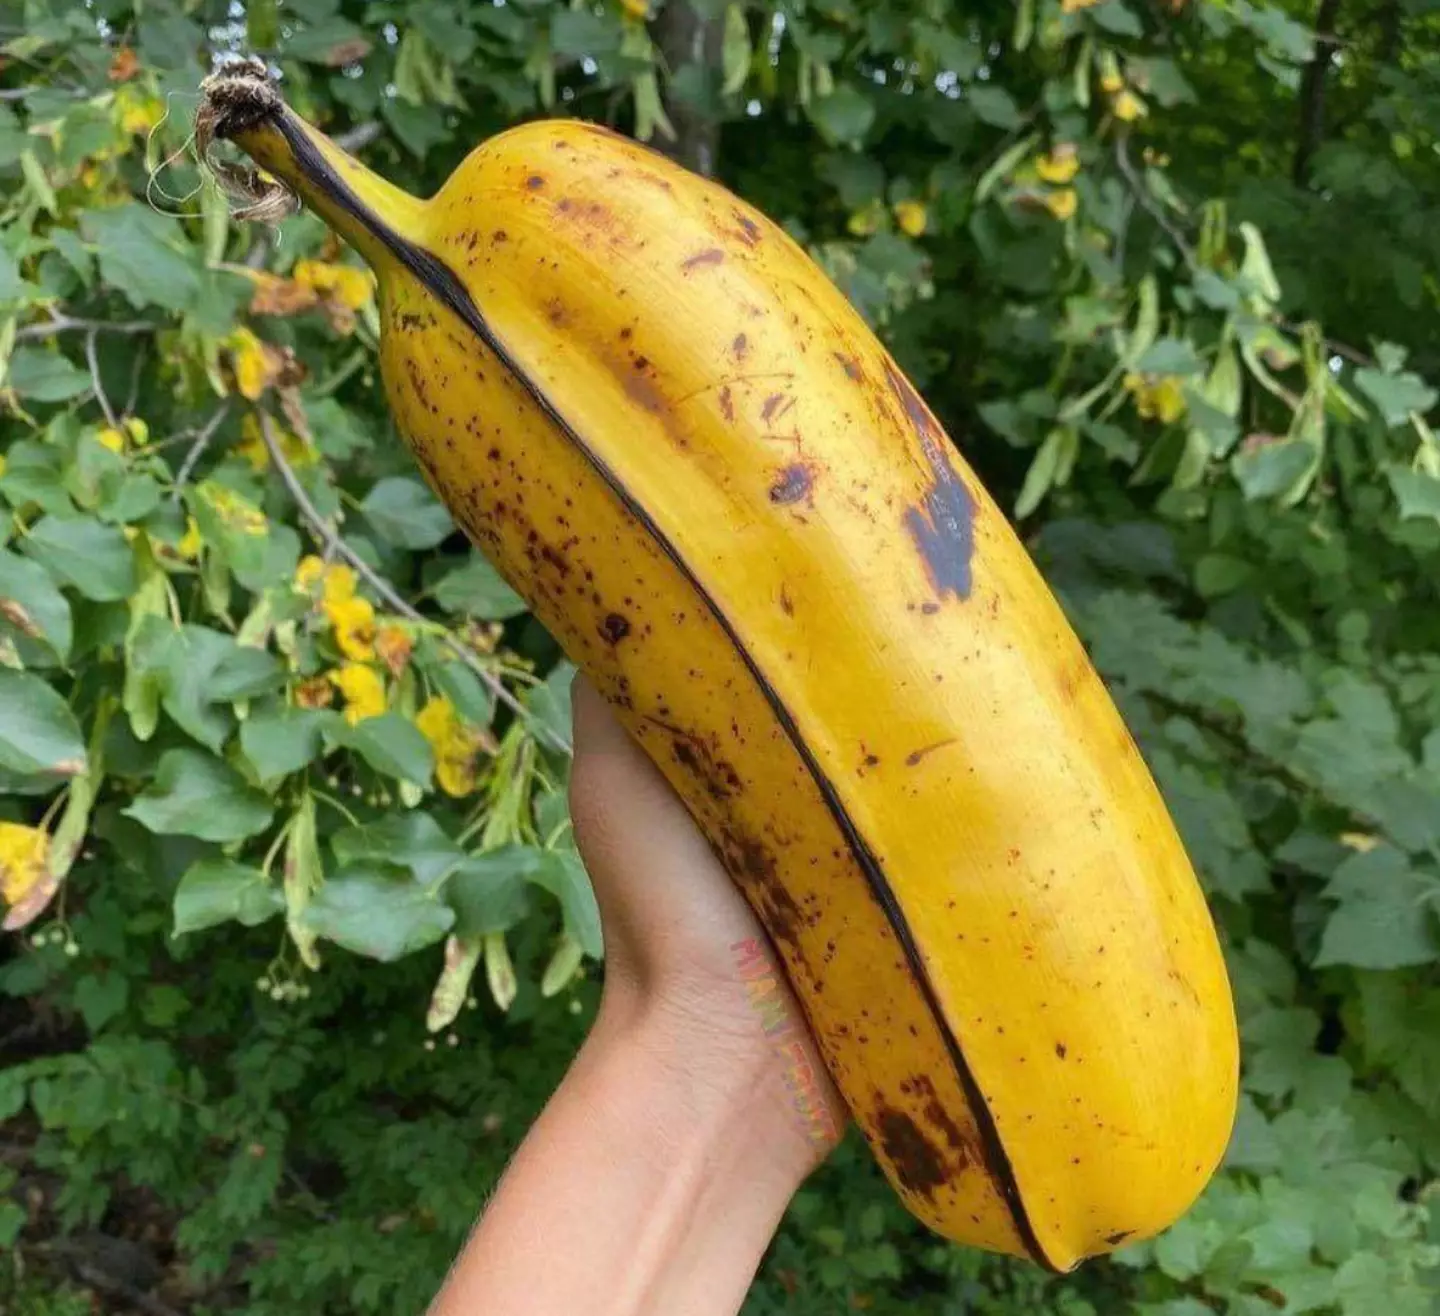 What would YOU do with the big banana?